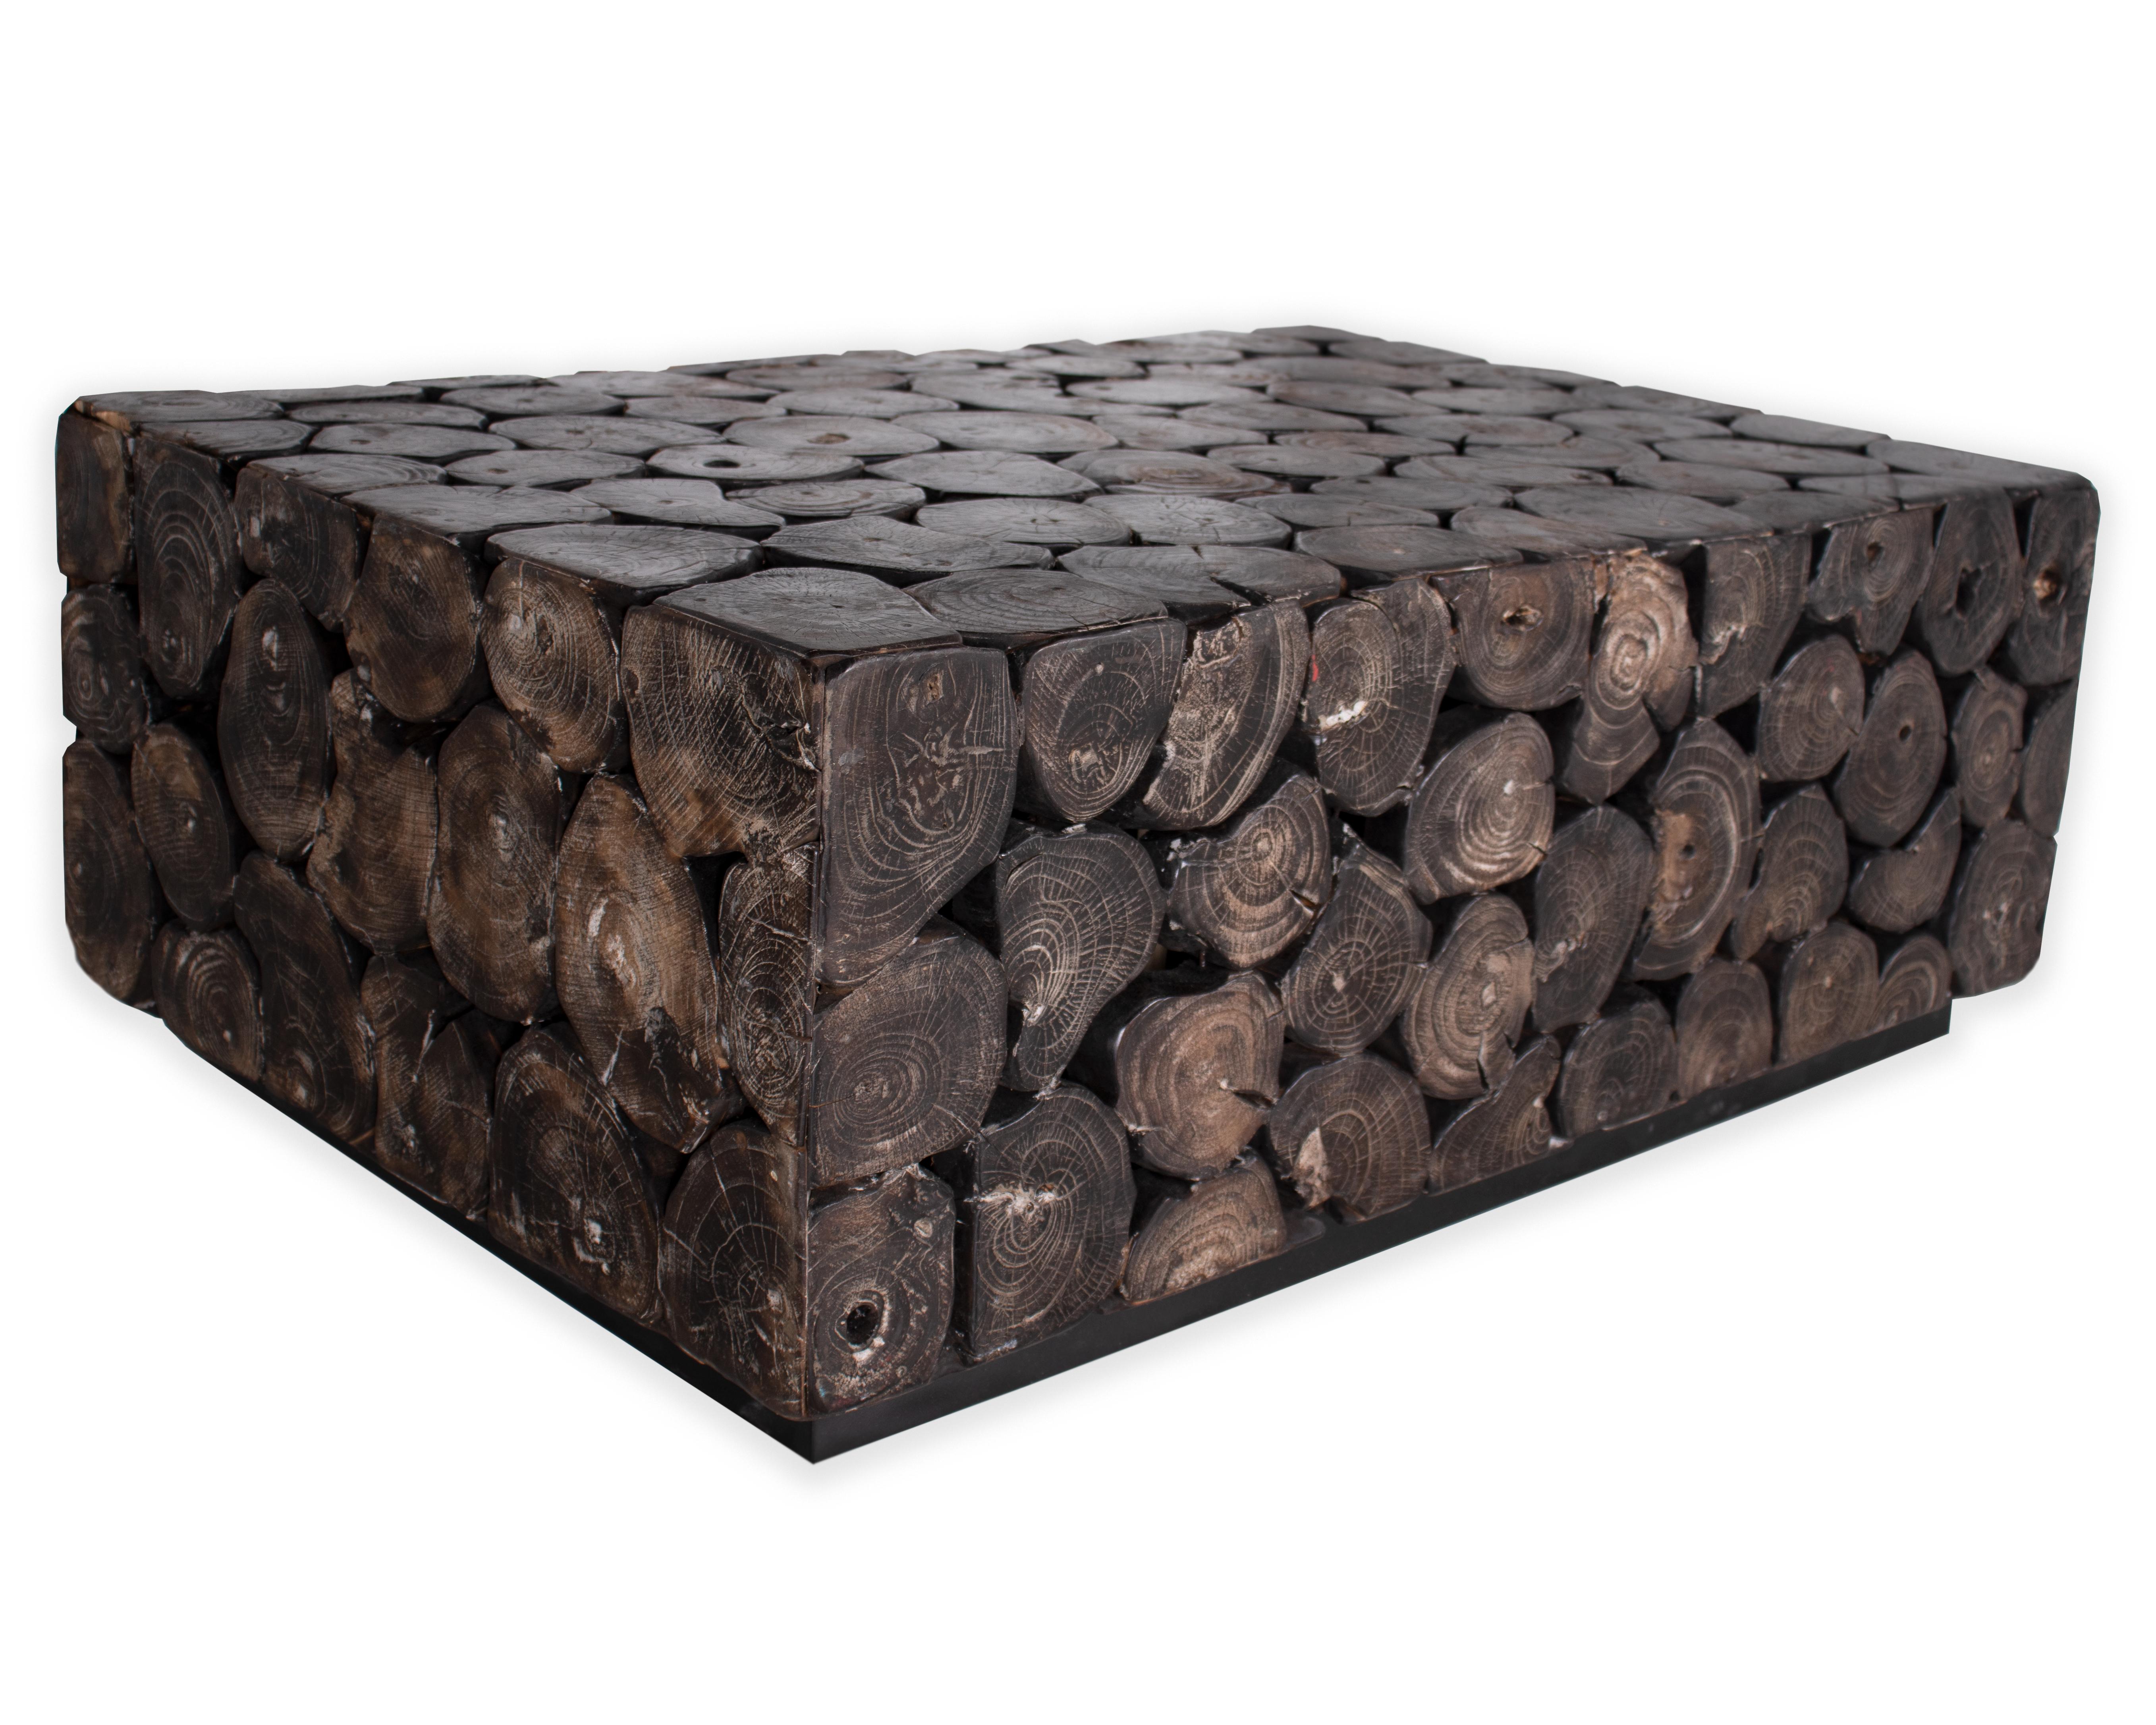 Ebonized lychee wood slice coffee table. 

Piece from the Le Monde collection. Exclusive to Brendan Bass.
   